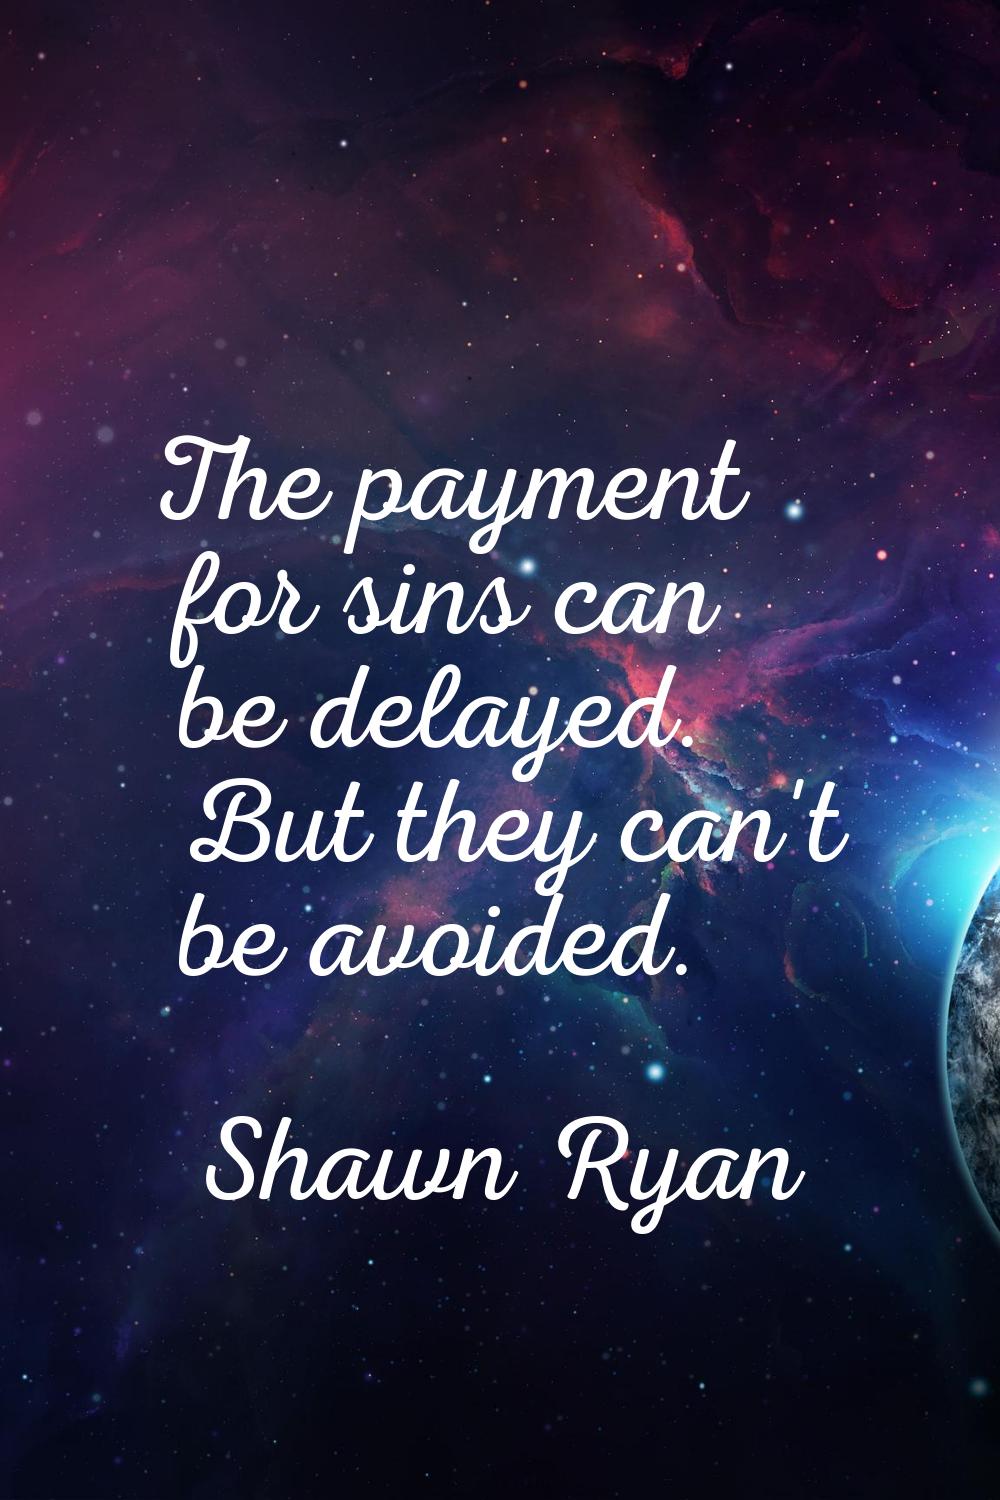 The payment for sins can be delayed. But they can't be avoided.